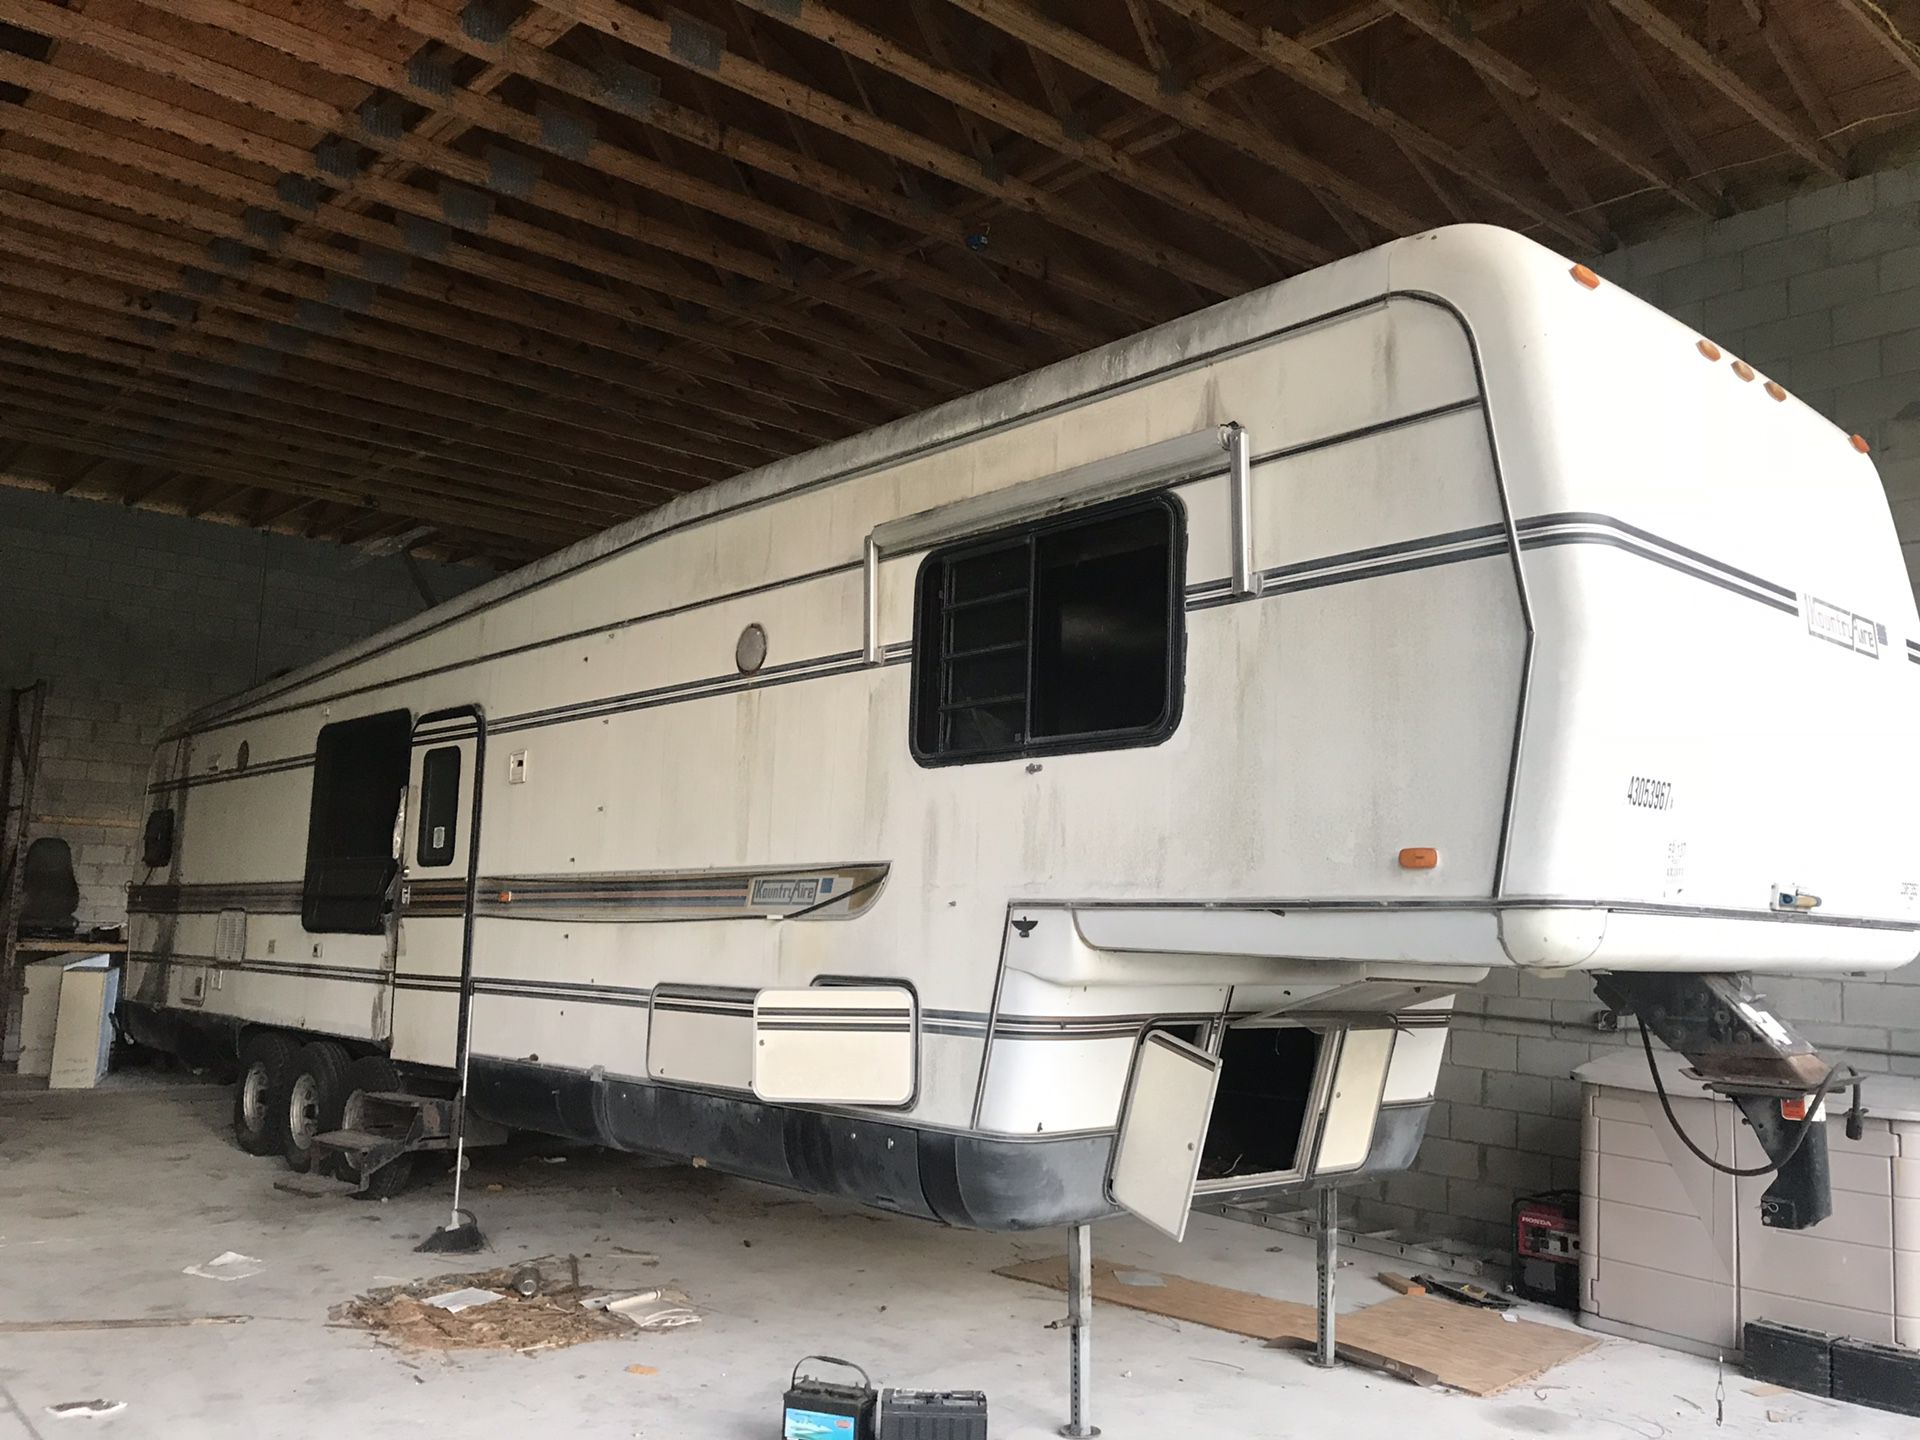 Free 40’ fifthwheel camper, tiny house, buggy trailer